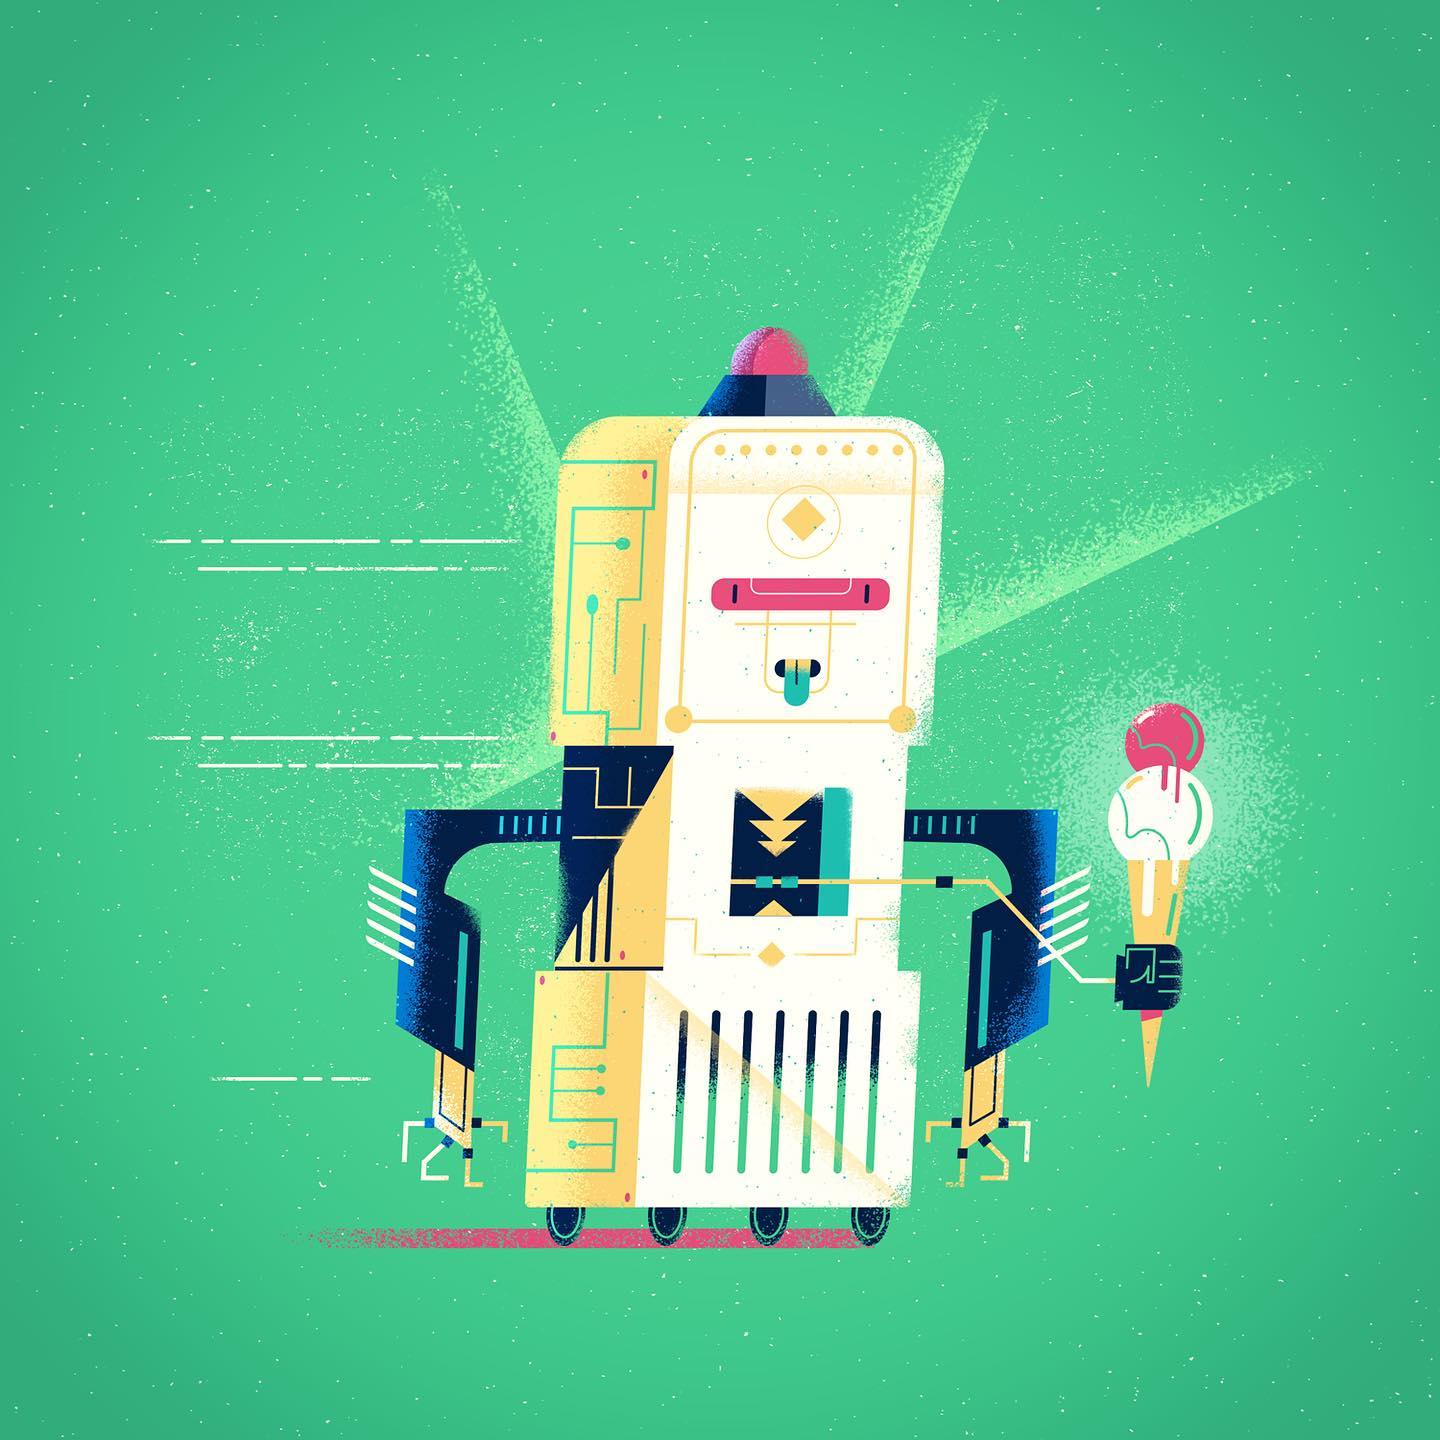 I am excited to see my first art collection available on@Neonmob website. A series of mini robots with funny ancient Greek names,visit:http://ow.ly/Lgpr50EtfNjand grab a free pack!..#robots #tradingcards #illustration #sounasart #εικονογράφηση #digitalart #art